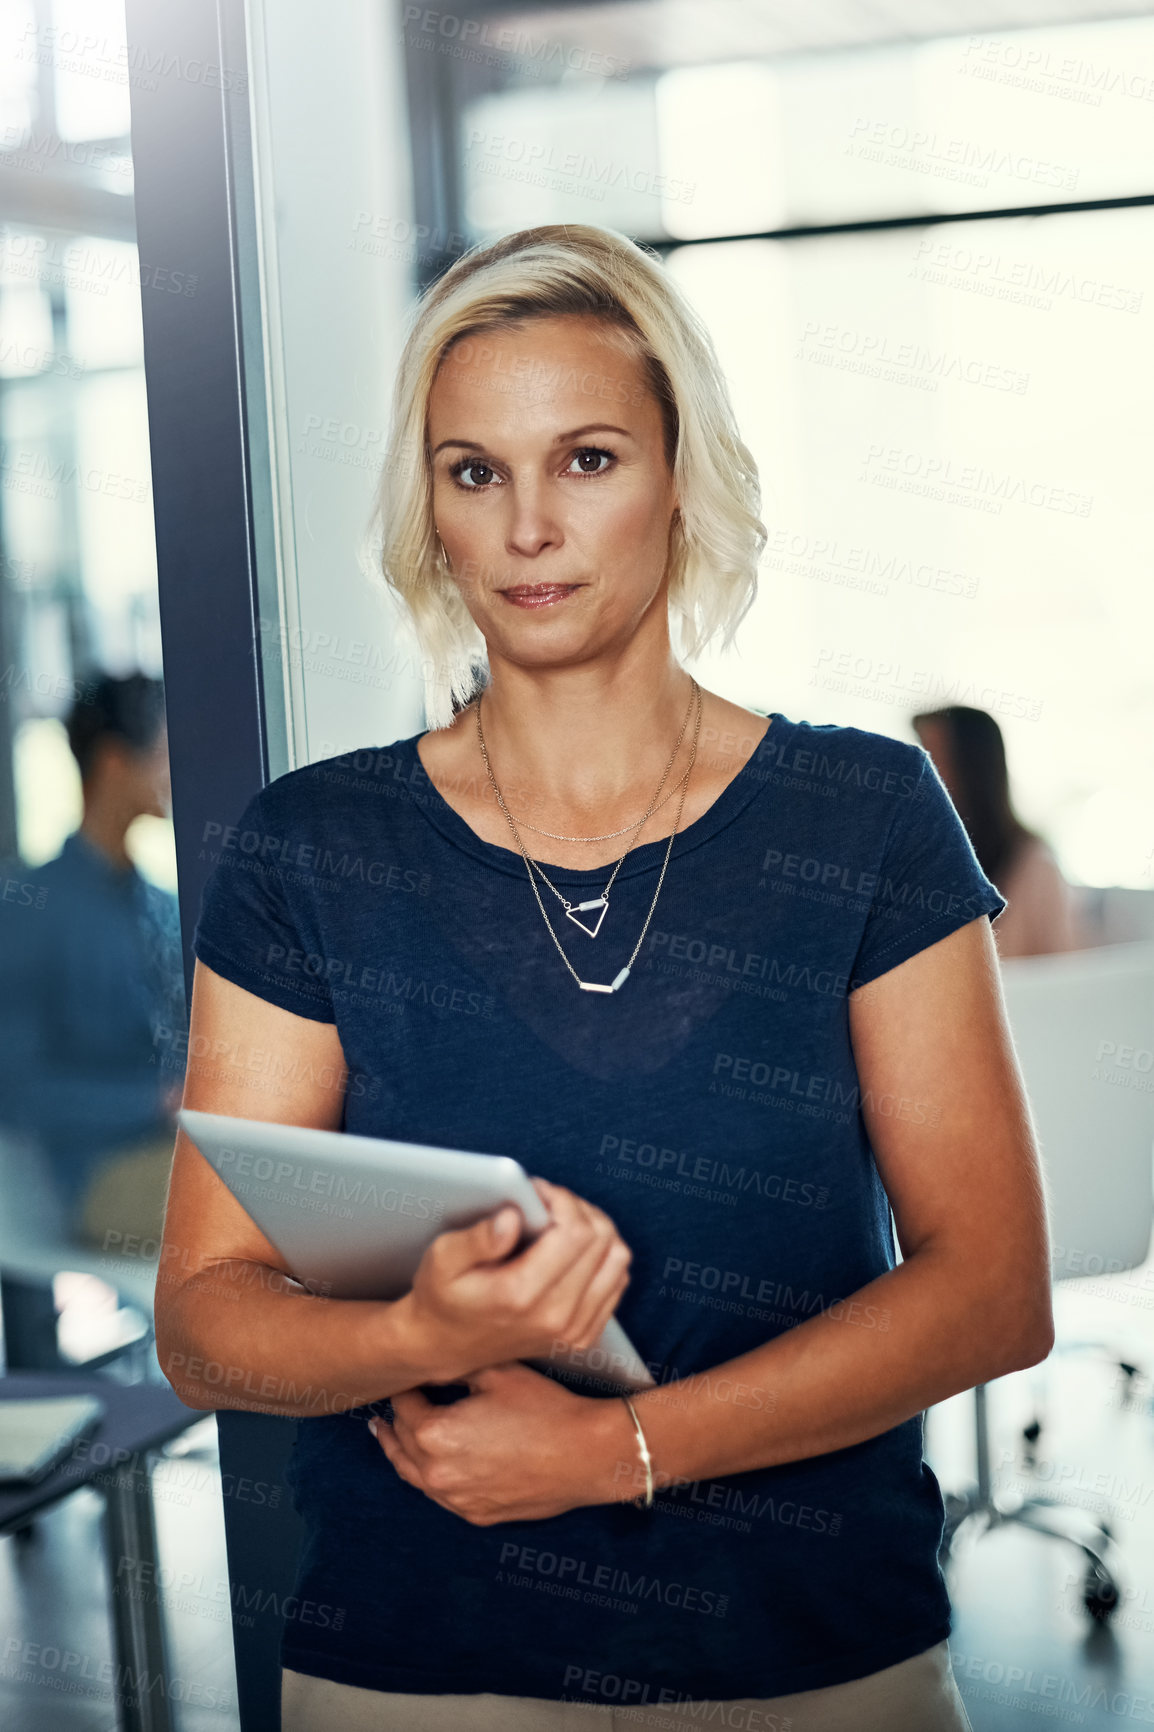 Buy stock photo Portrait of a confident young businesswoman using a digital tablet in an office